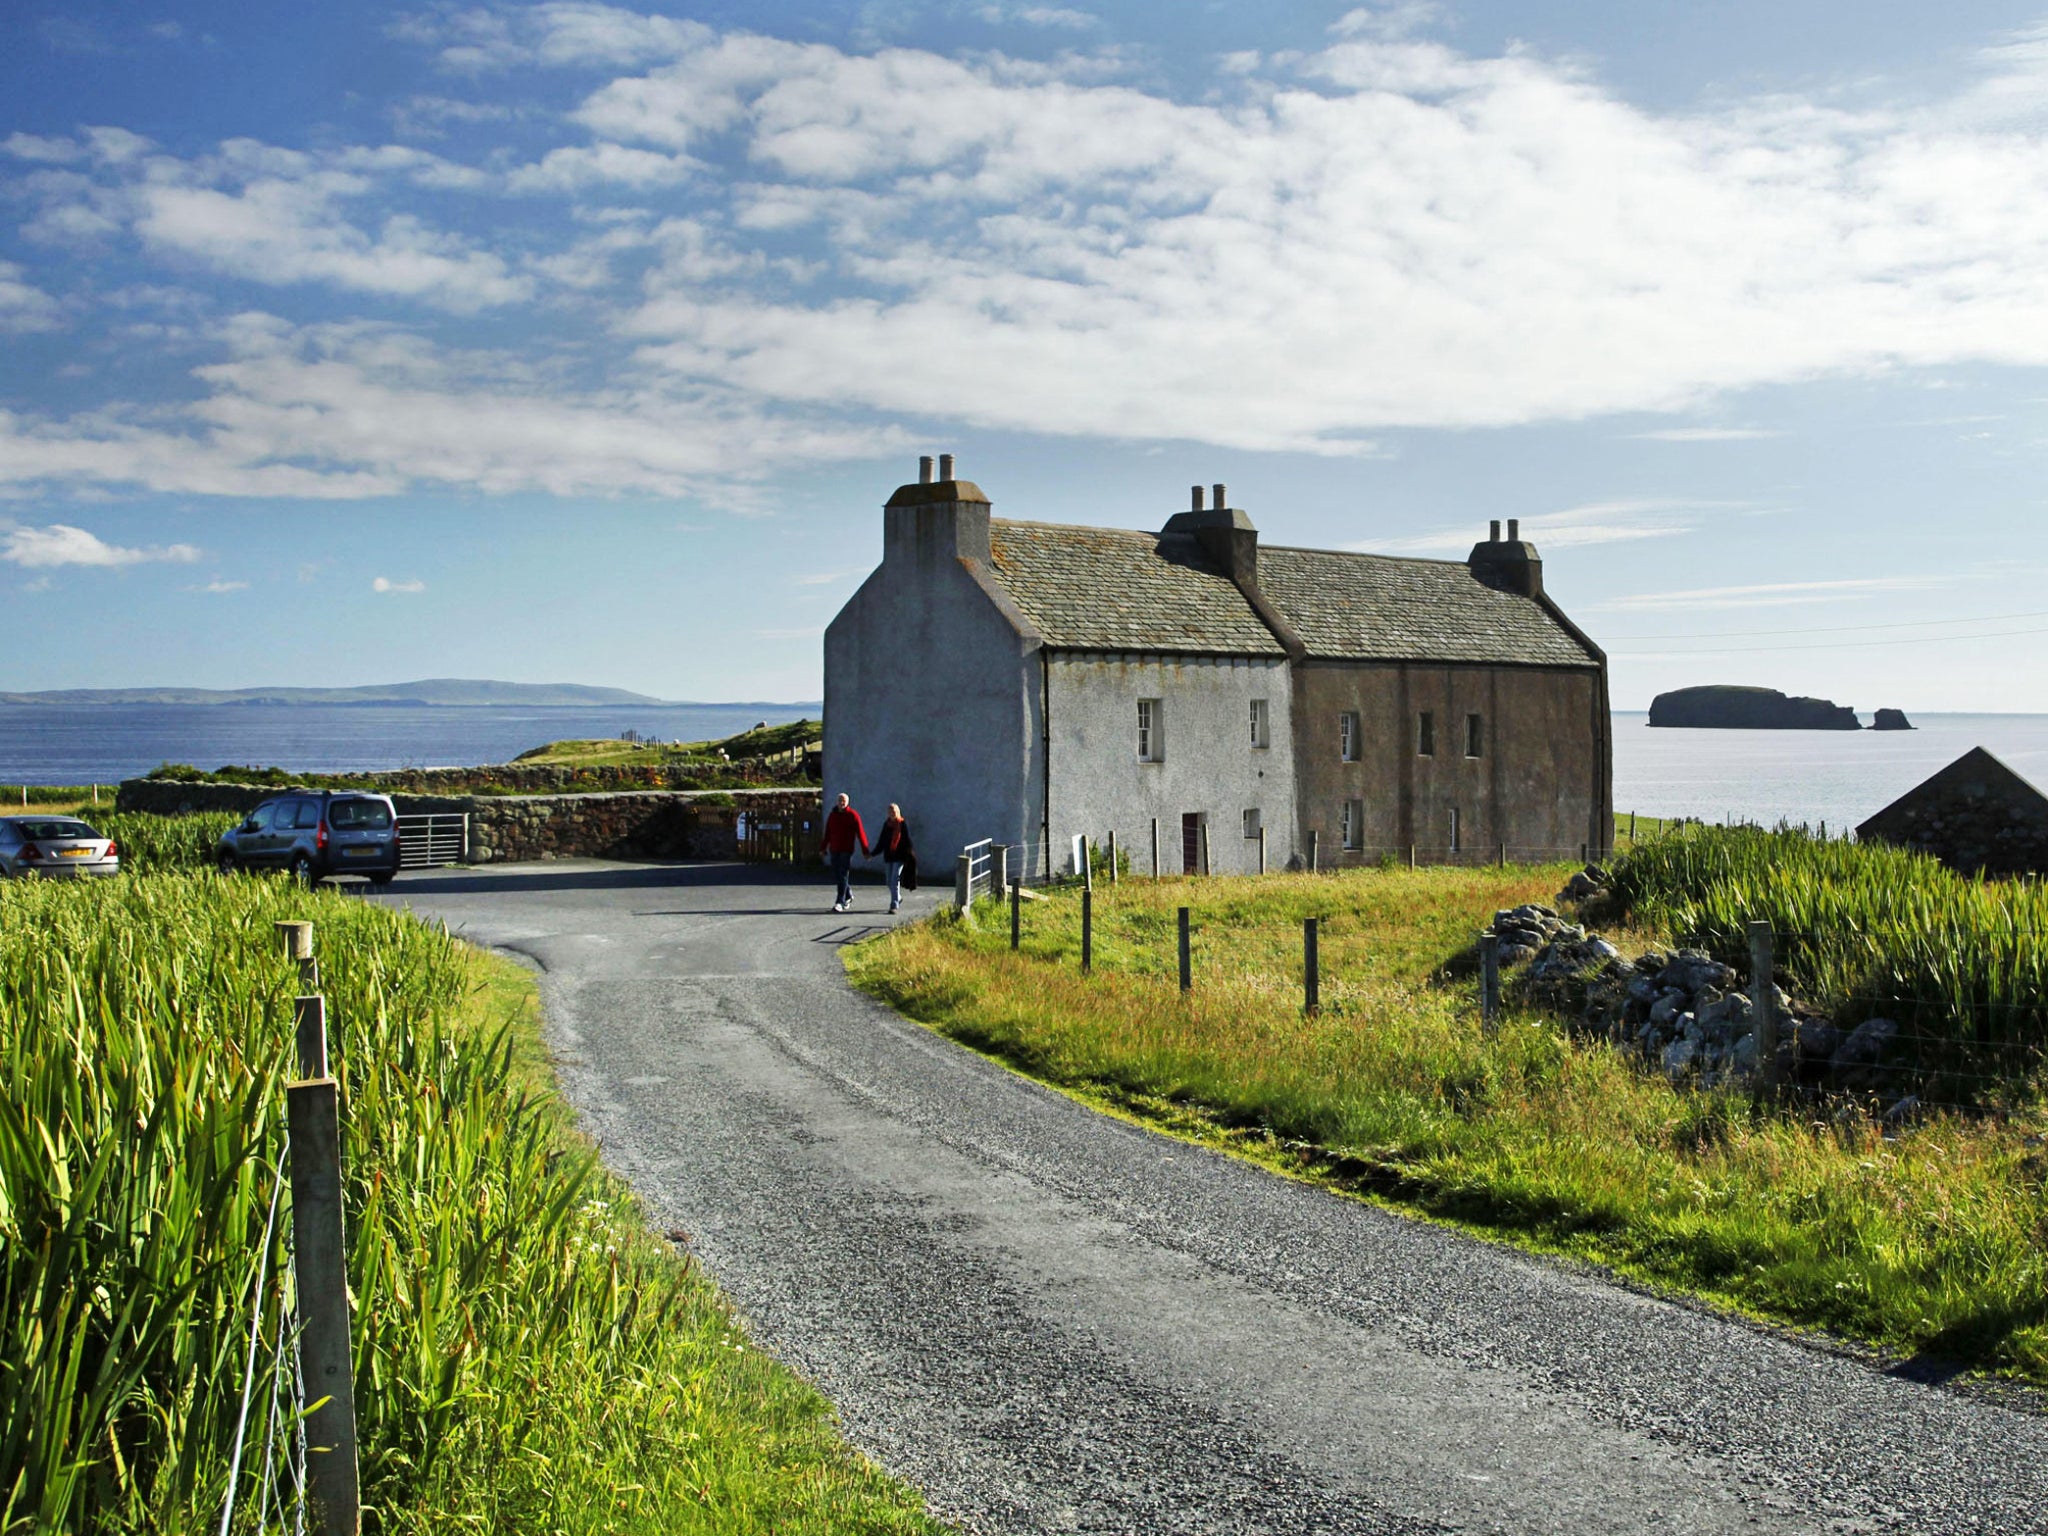 Tangwick Haa Museum in Shetland where average house price has more than doubled in the past decade